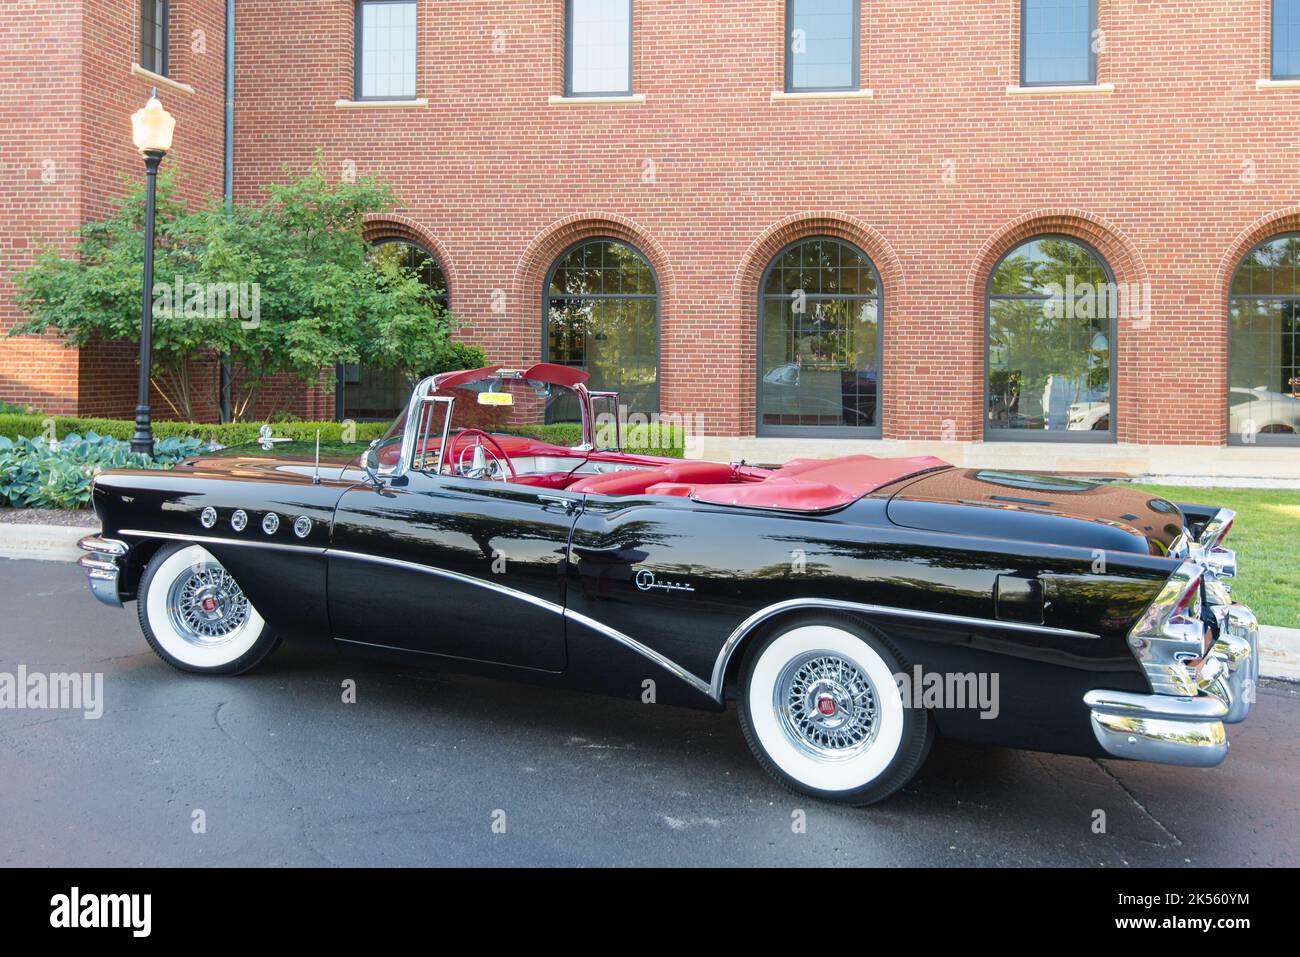 PLYMOUTH, MI/USA - JULY 30, 2017: A 1955 Buick Super car with VentiPorts on display at the Concours d'Elegance of America car show. Stock Photo